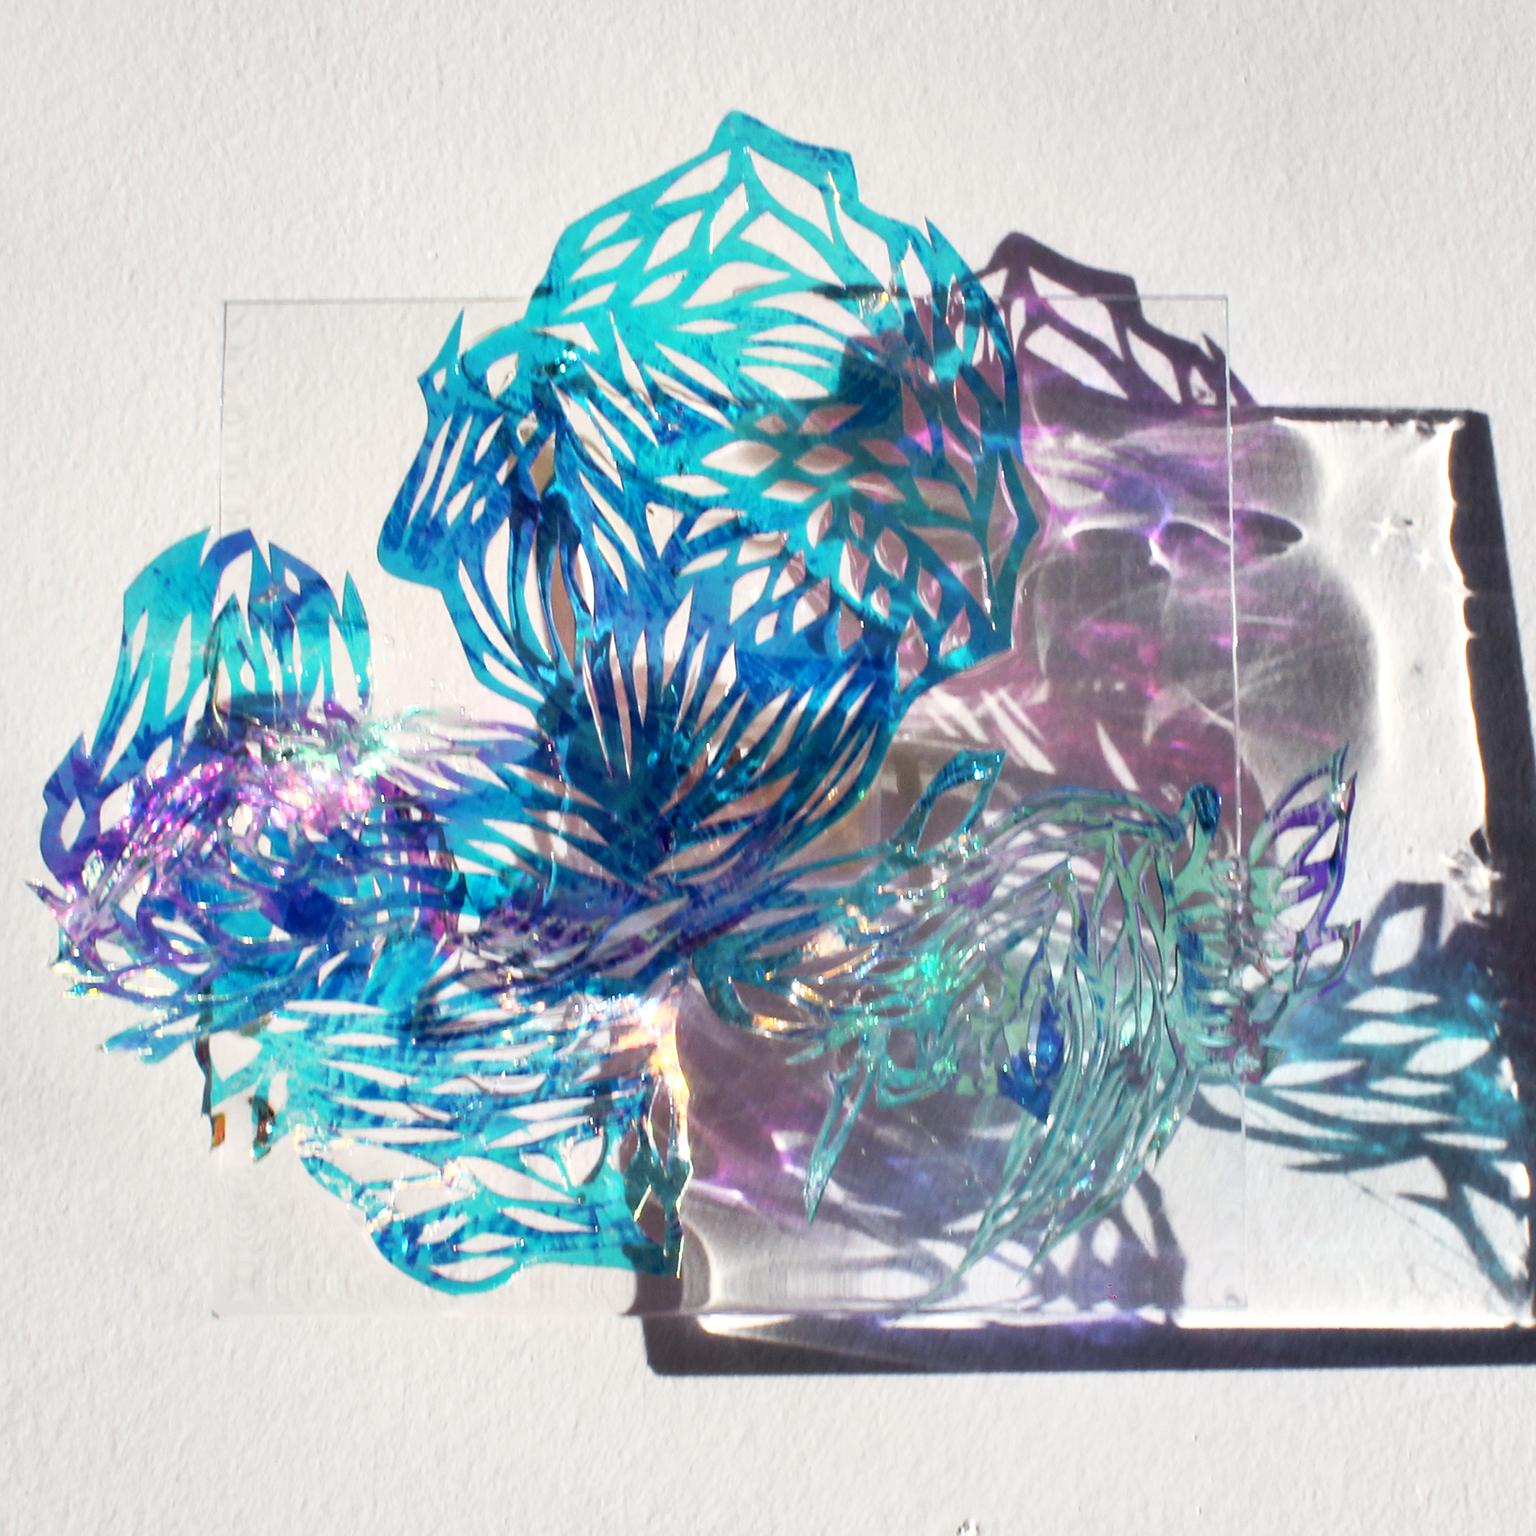 Medium: hand cut mylar, acetate, resin, acrylic  

Julia Sinelnikova is an interdisciplinary artist who works with holograms, performance, and digital culture. Her light installations have been exhibited internationally, and she has performed widely